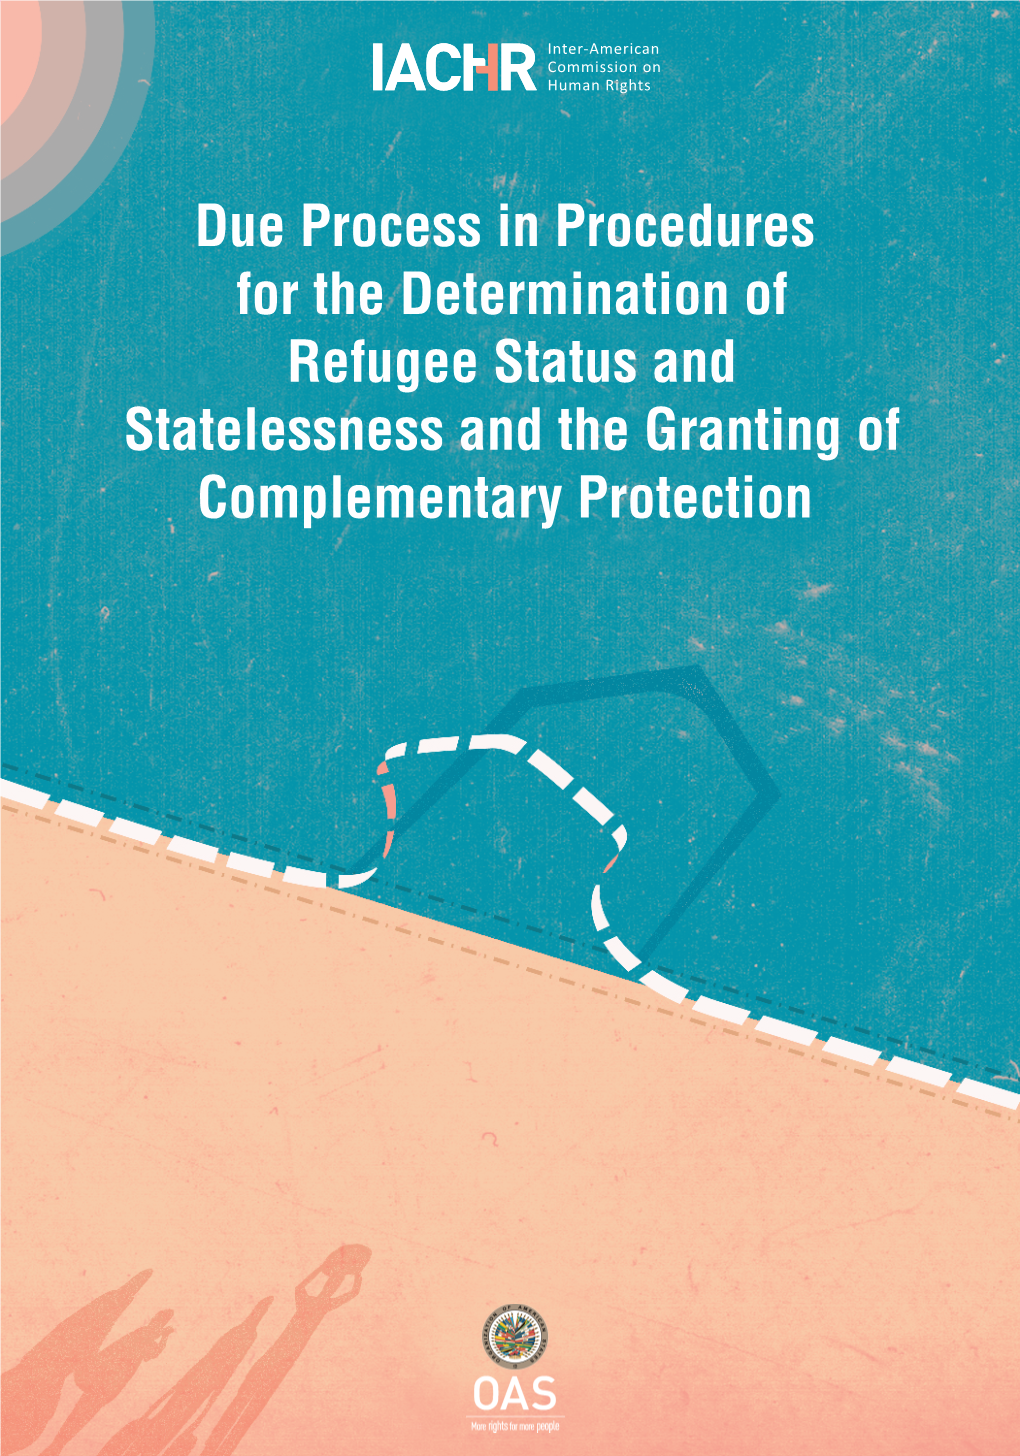 Due Process in Procedures for the Determination of Refugee Status and Statelessness and the Granting of Complementary Protection